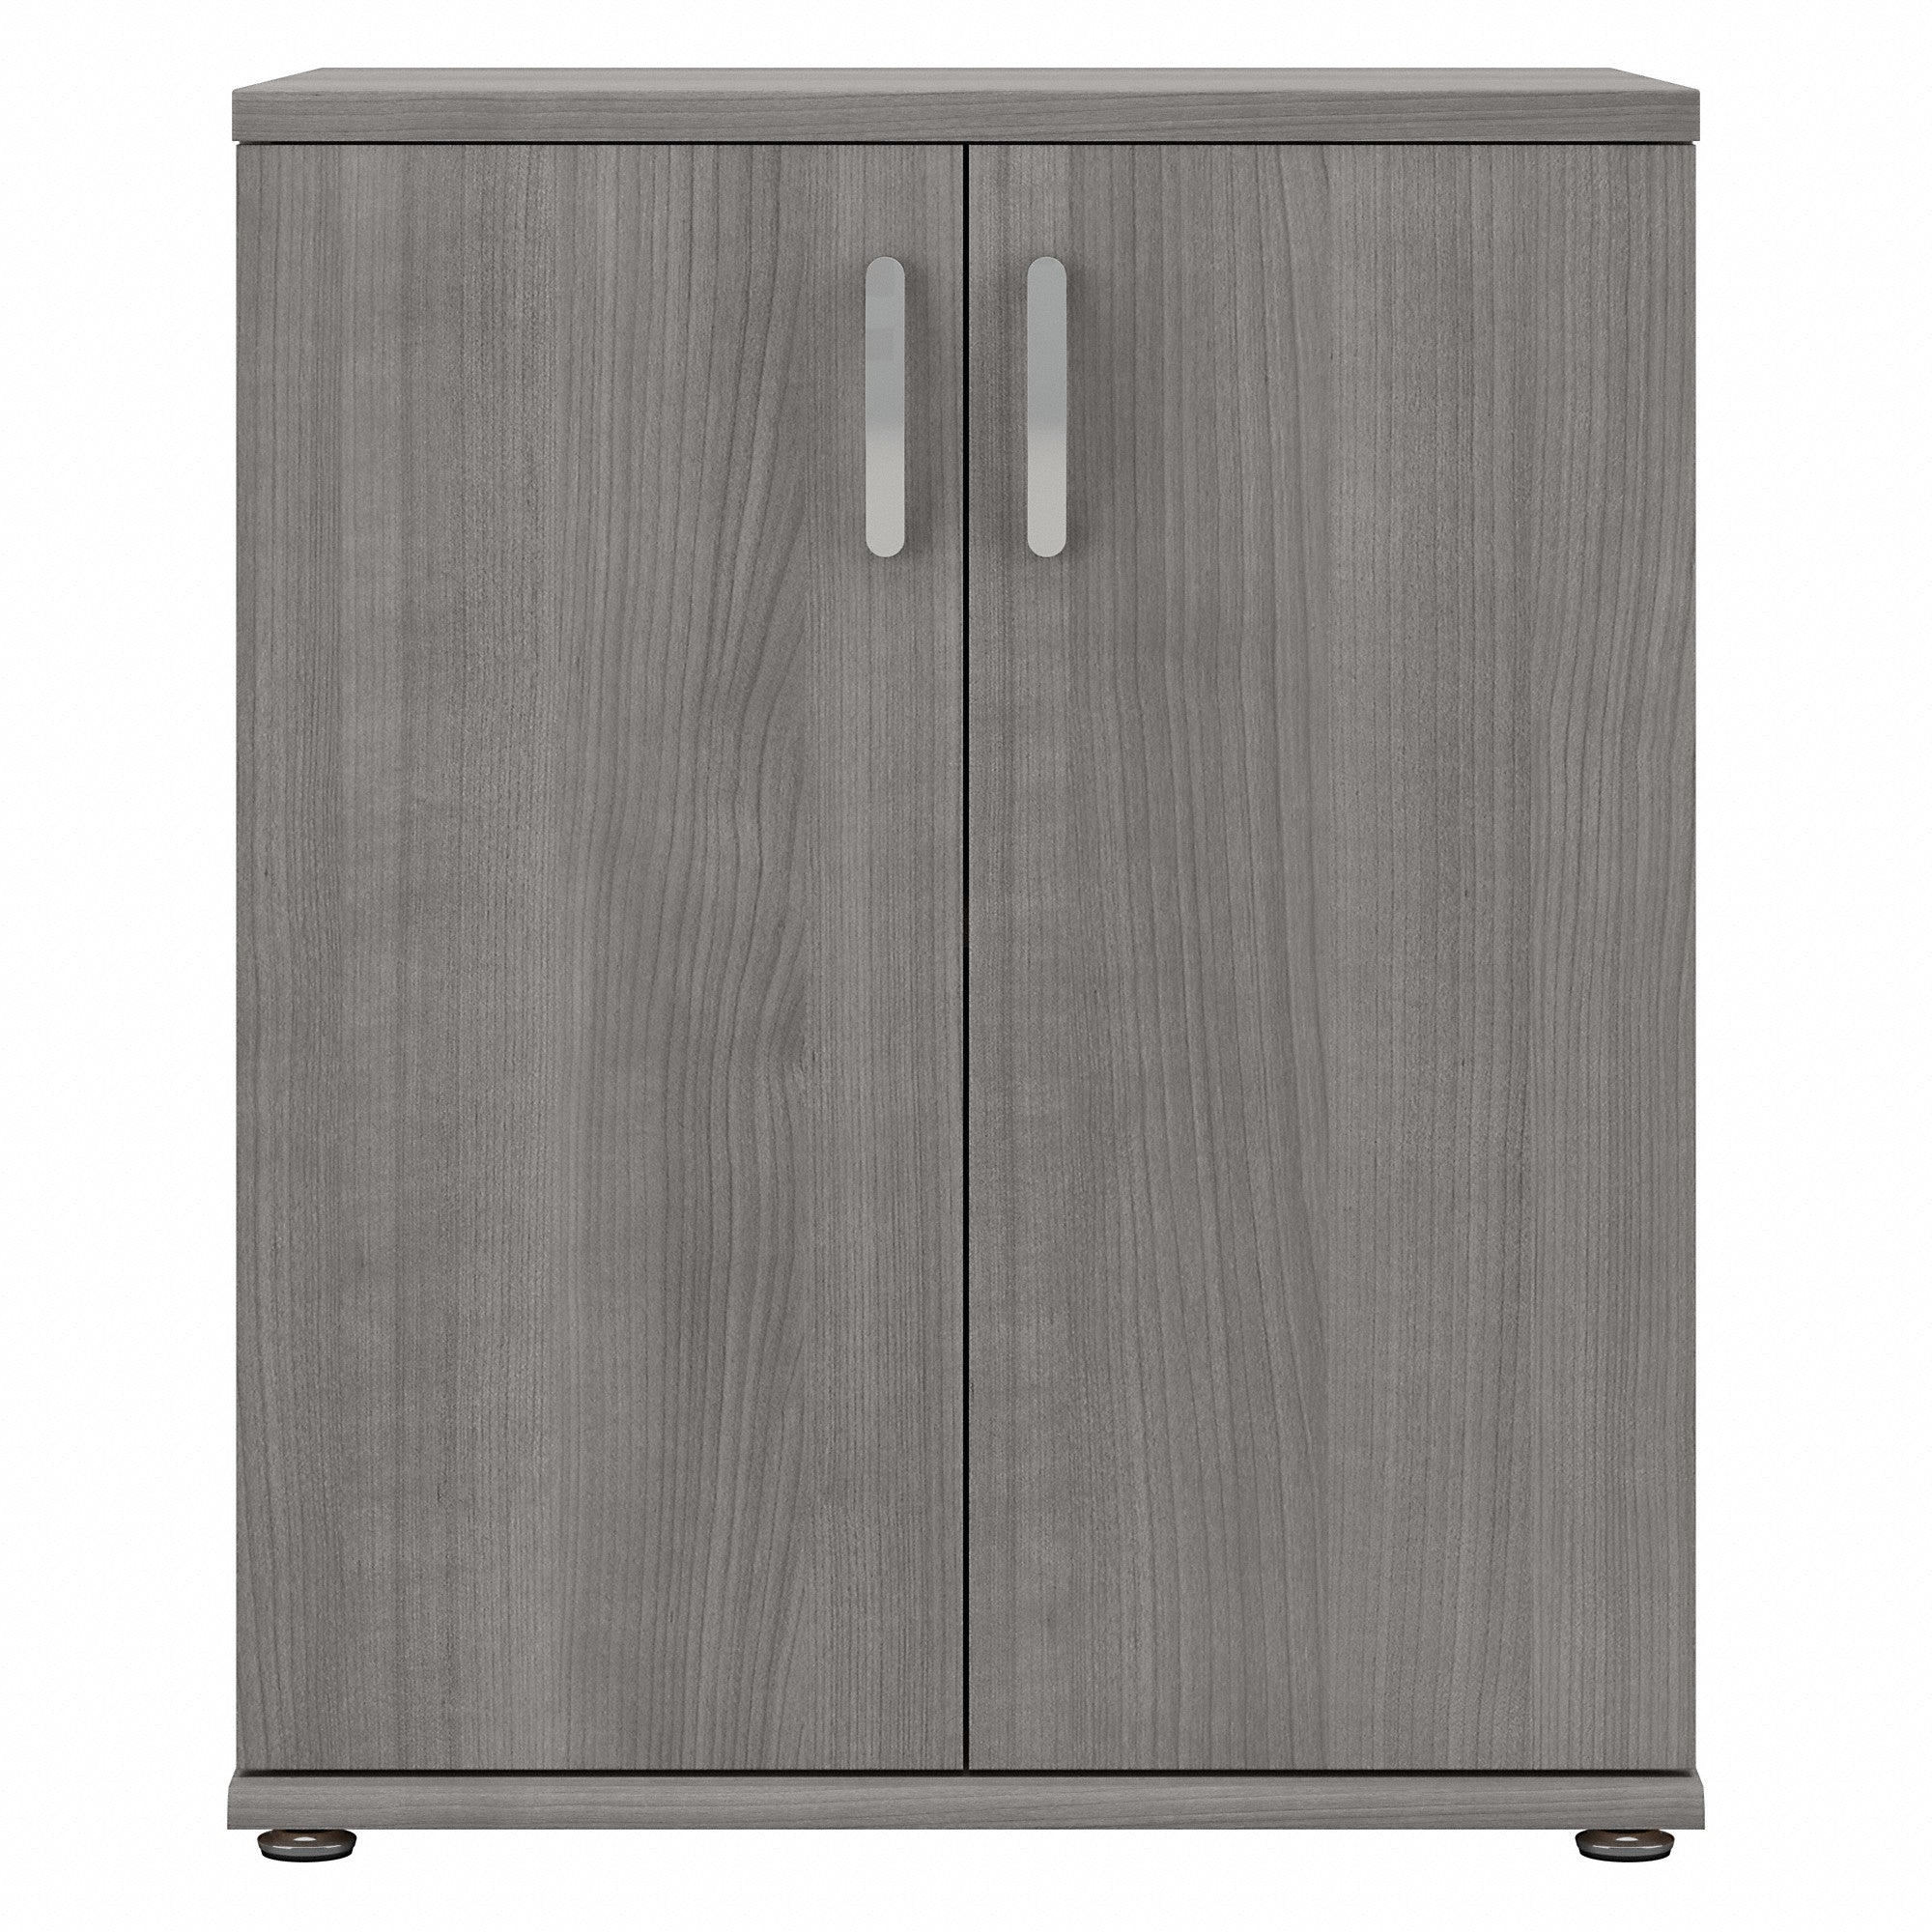 Bush Business Furniture Universal Floor Storage Cabinet with Doors and Shelves